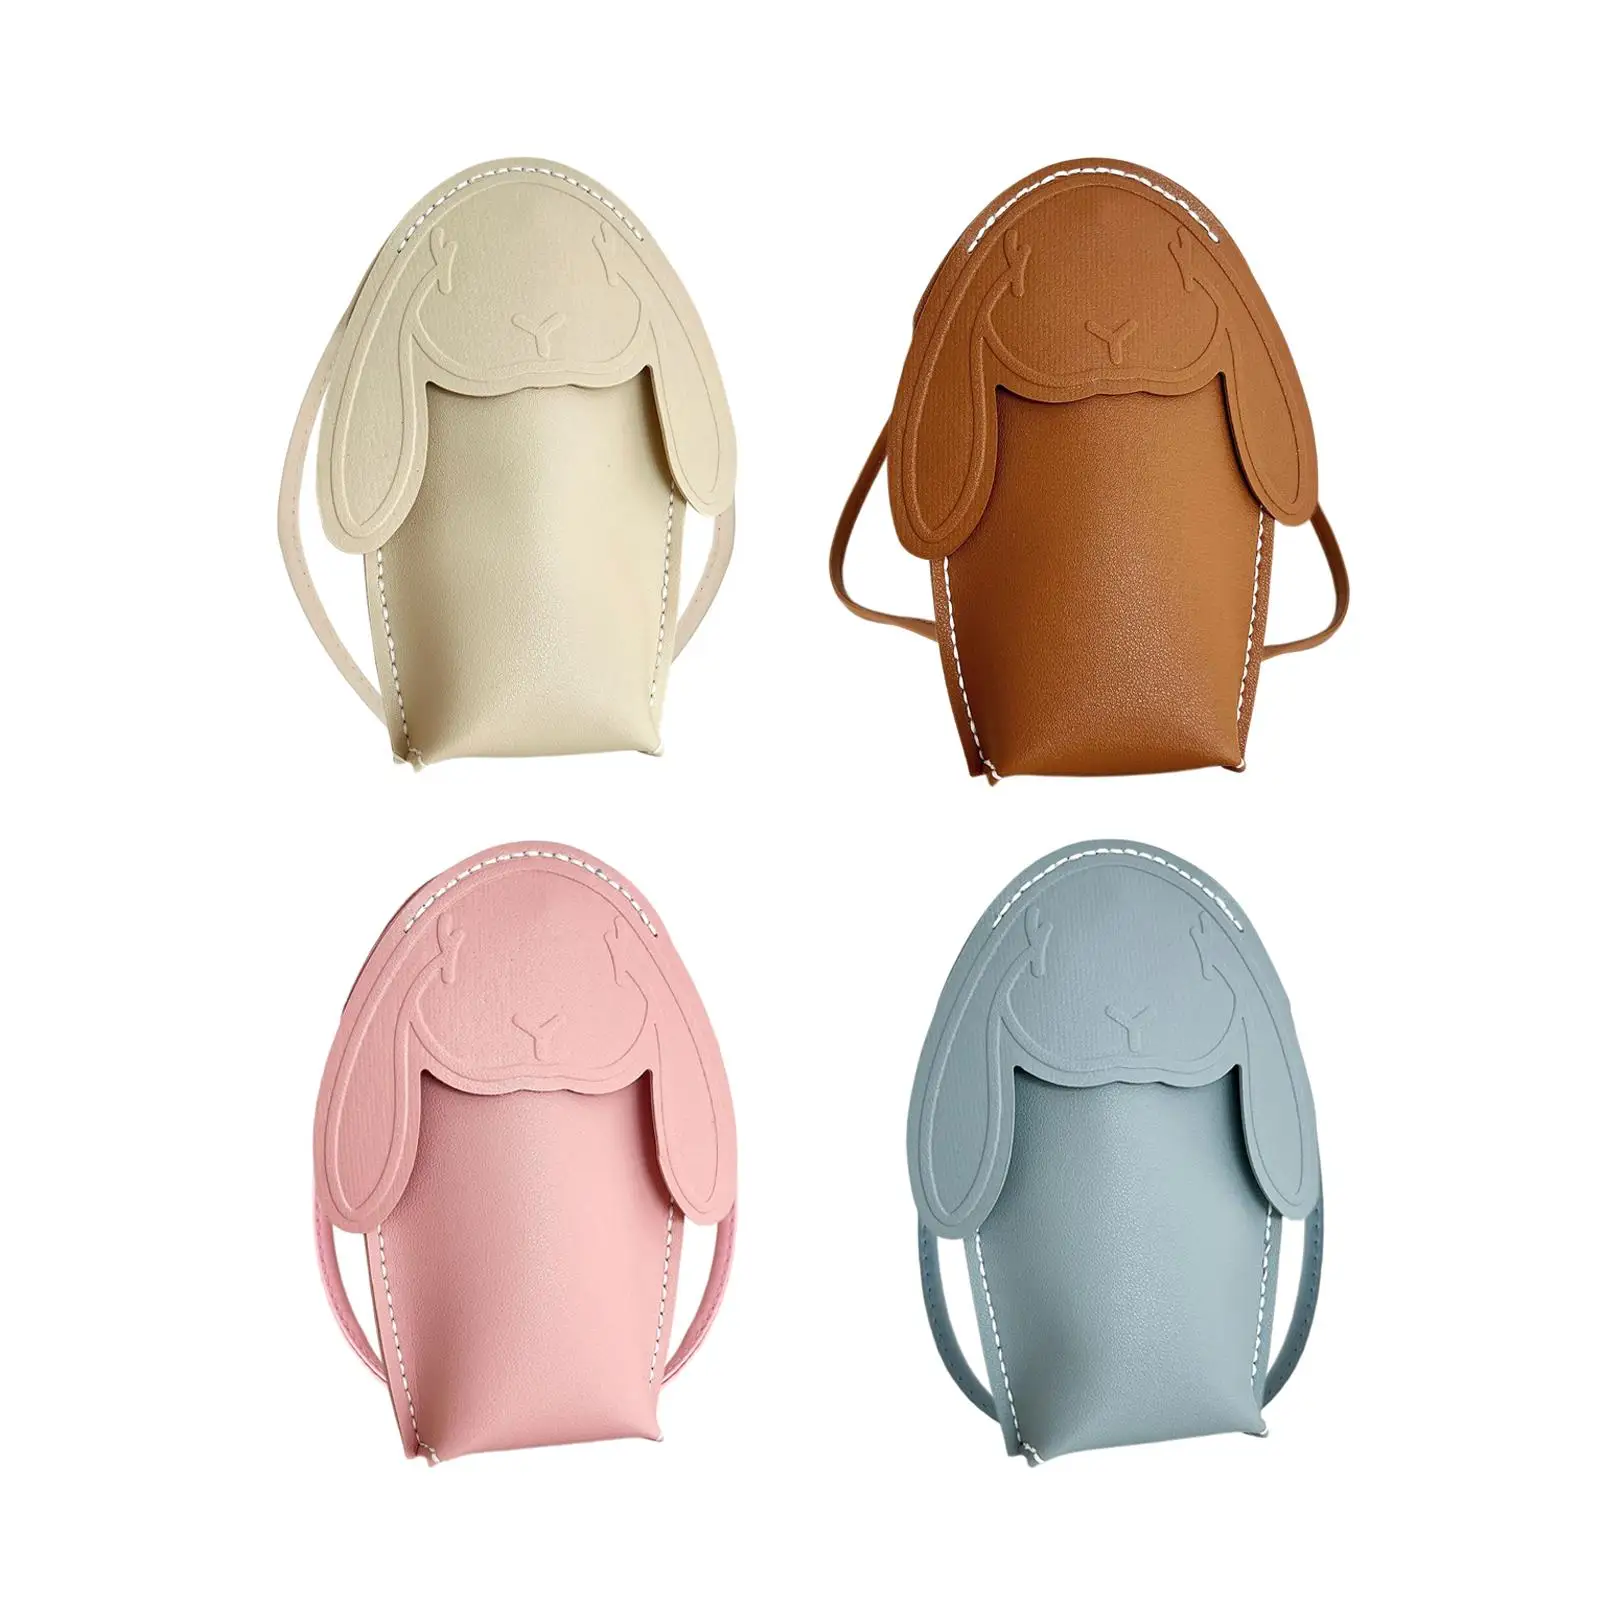 1 Set DIY Shoulder Bag Making Material with Strap PU Hand Woven Bucket Bag Crafts Projects Starter Handicraft Gifts for Friends